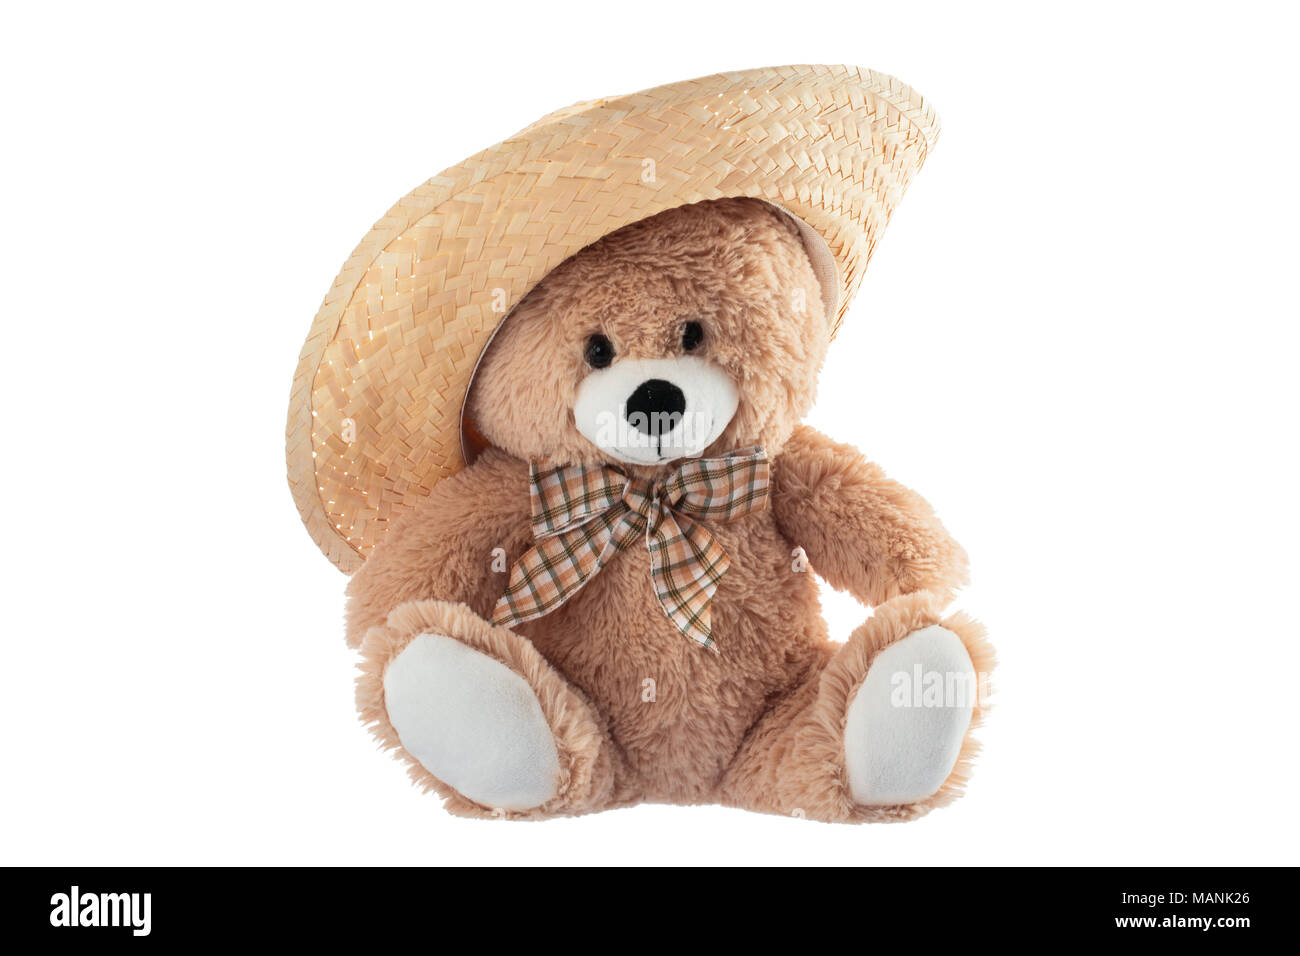 Fluffy teddy bear with straw hat hat isolé sur fond blanc Banque D'Images